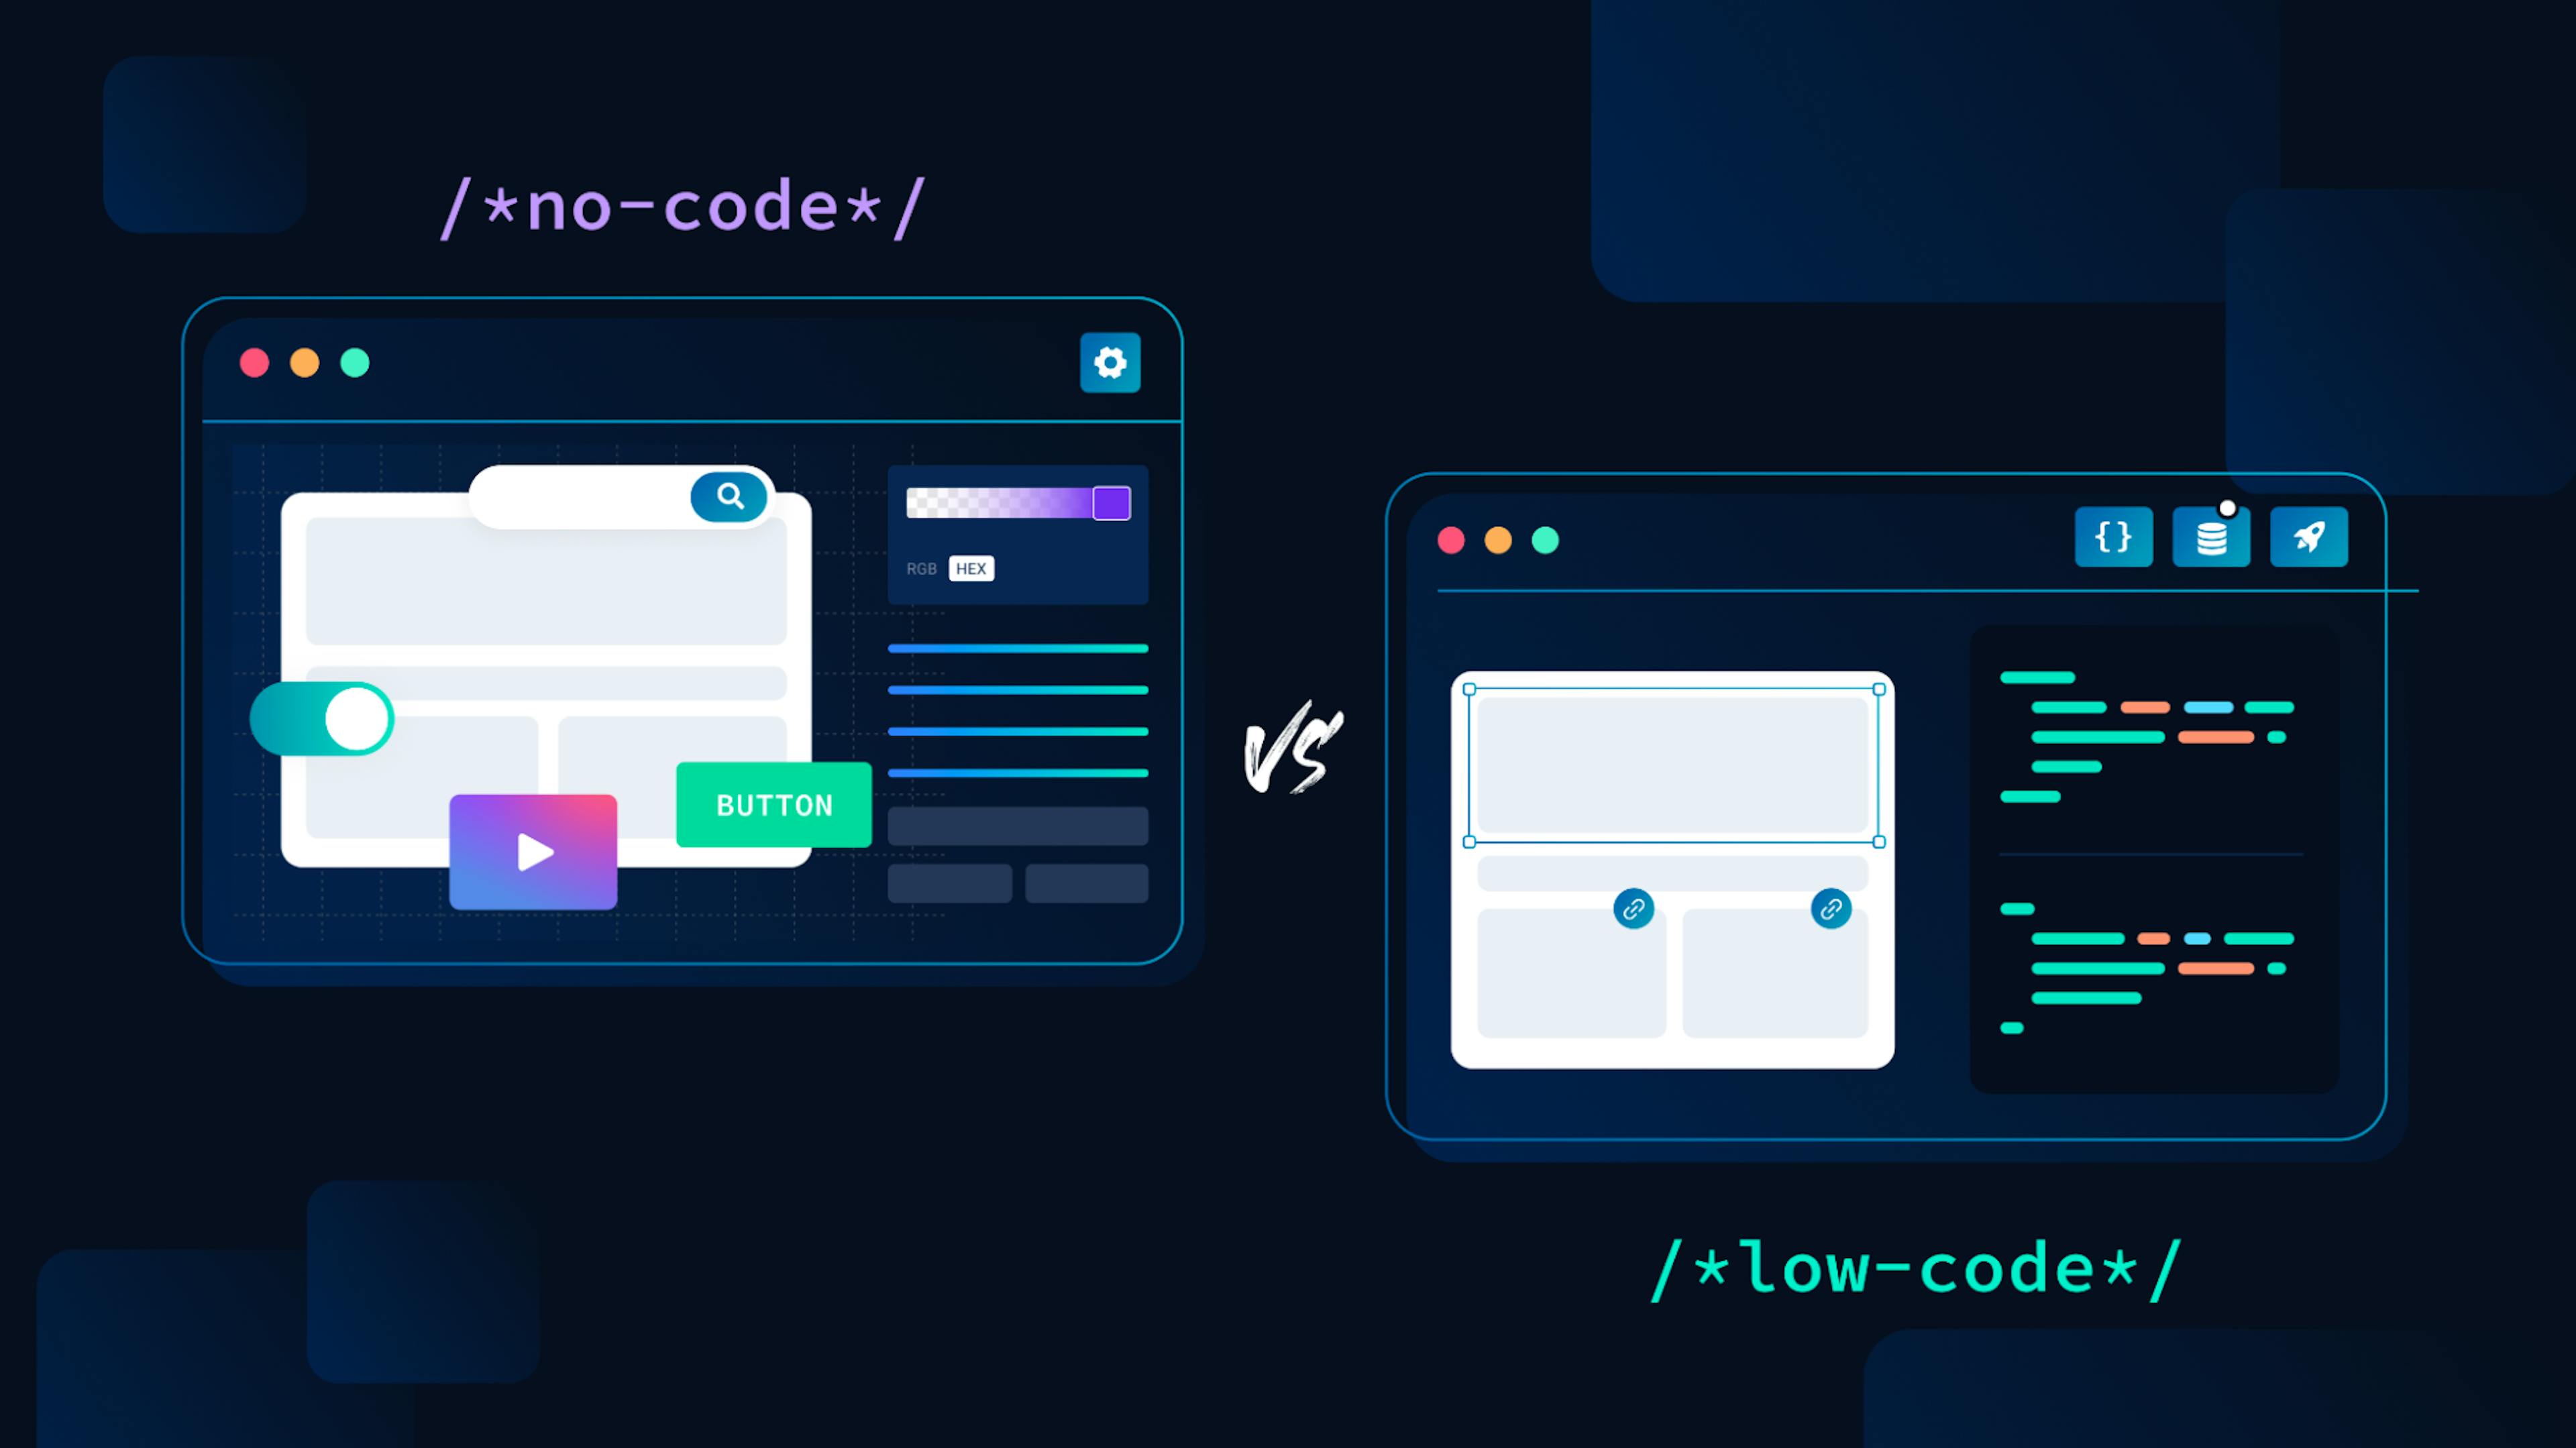 Cover image showing no code vs low code